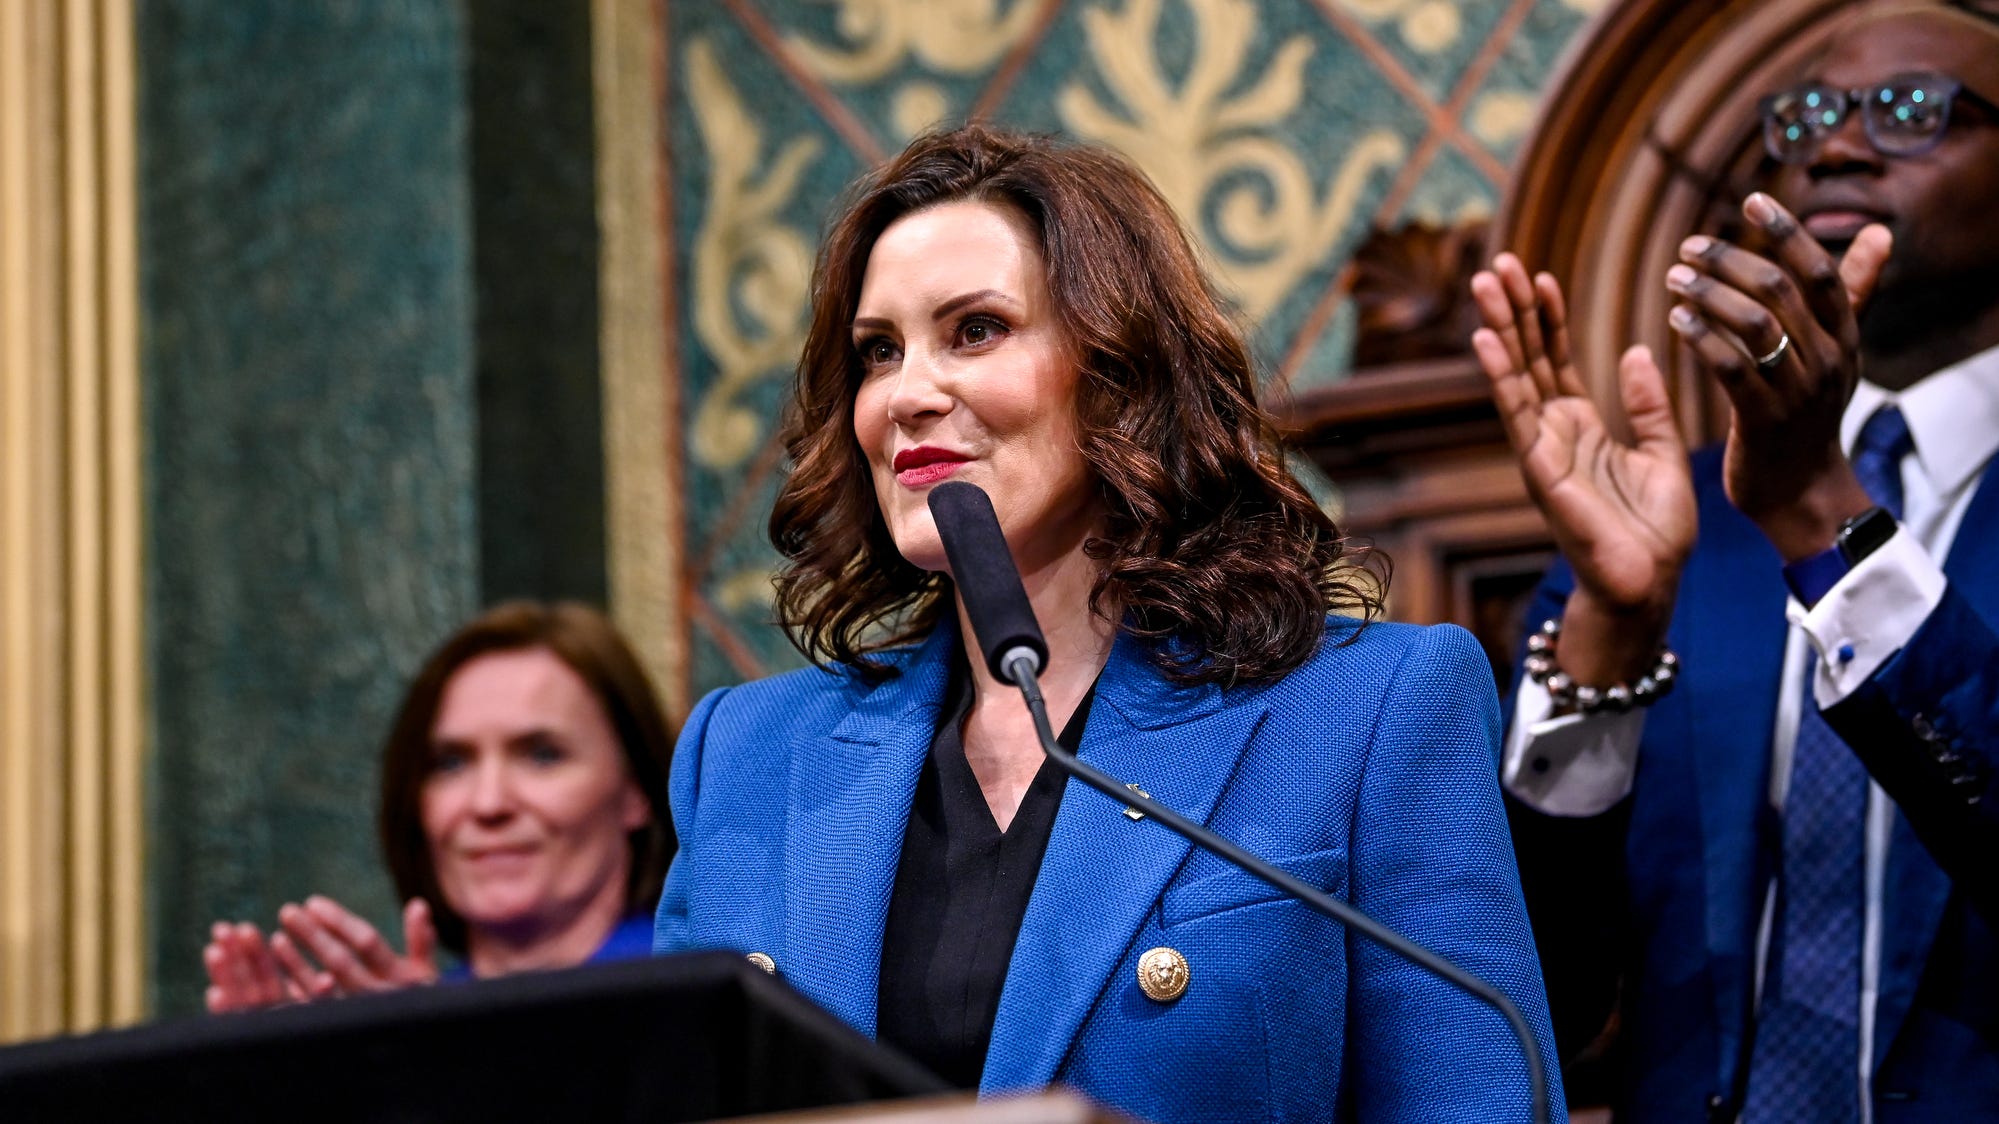 Gov. Whitmer proposal: A $180 check for each Michigan tax filer - Detroit Free Press : The proposal, detailed Monday by Whitmer and Democratic leaders in the House and Senate, would distribute some of Michigan's record budget surplus.  | Tranquility 國際社群